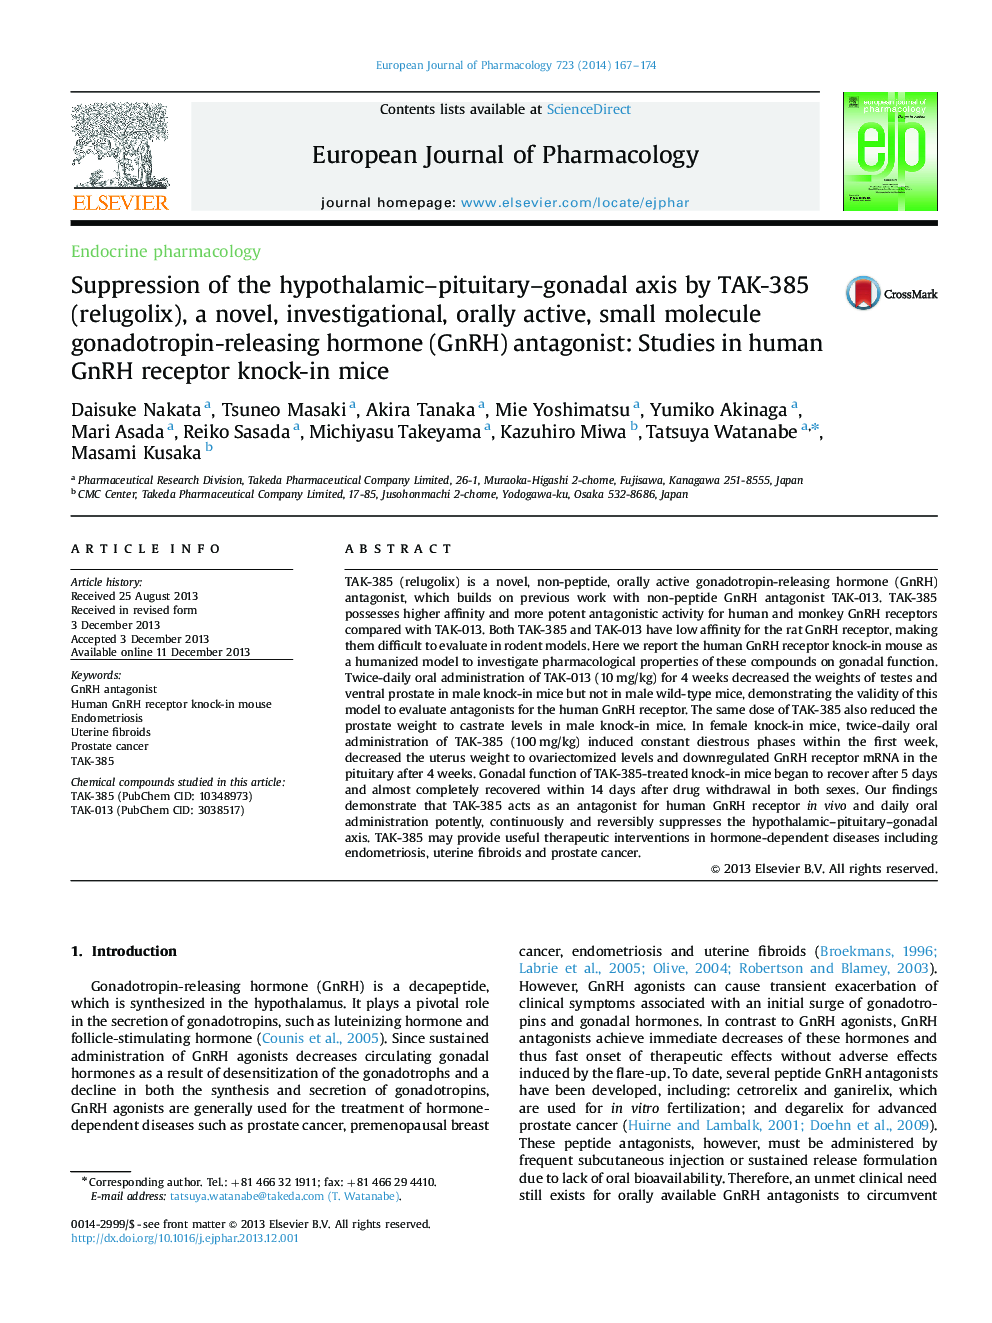 Suppression of the hypothalamic–pituitary–gonadal axis by TAK-385 (relugolix), a novel, investigational, orally active, small molecule gonadotropin-releasing hormone (GnRH) antagonist: Studies in human GnRH receptor knock-in mice